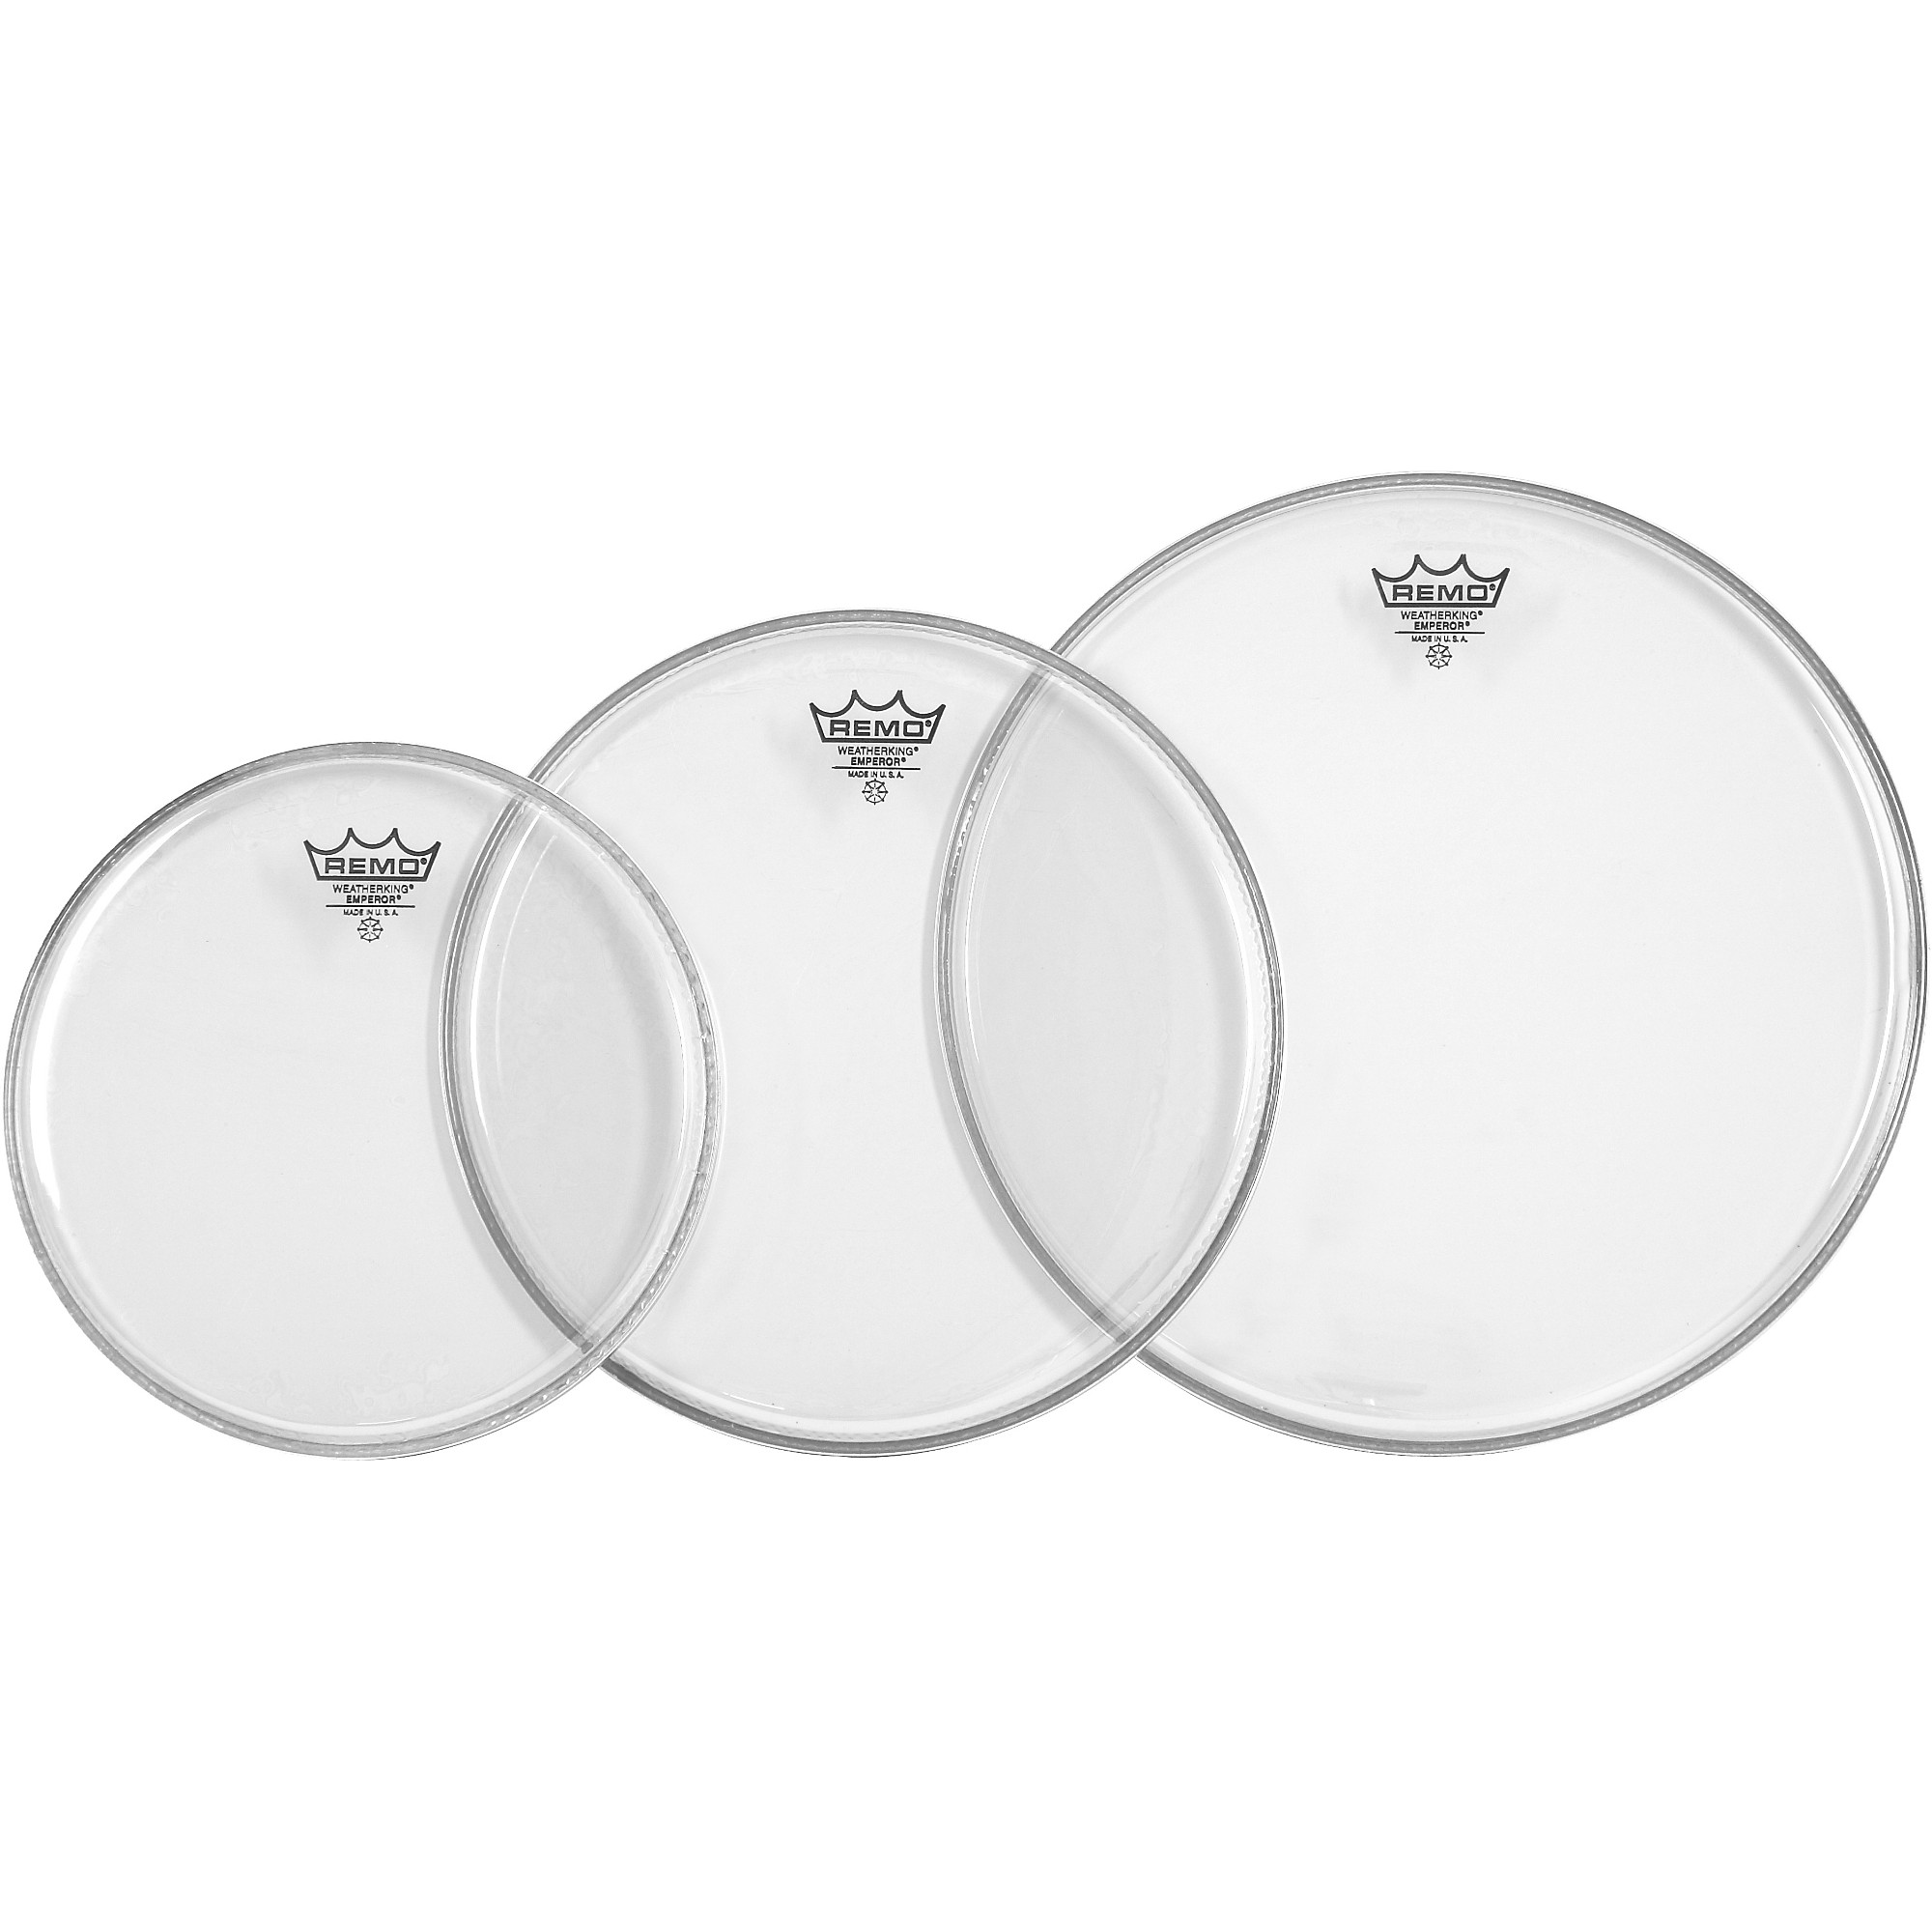 Remo USA 15" Emperor Clear Drum Kit Head BE-0315-00 CLEARANCE PRICE 